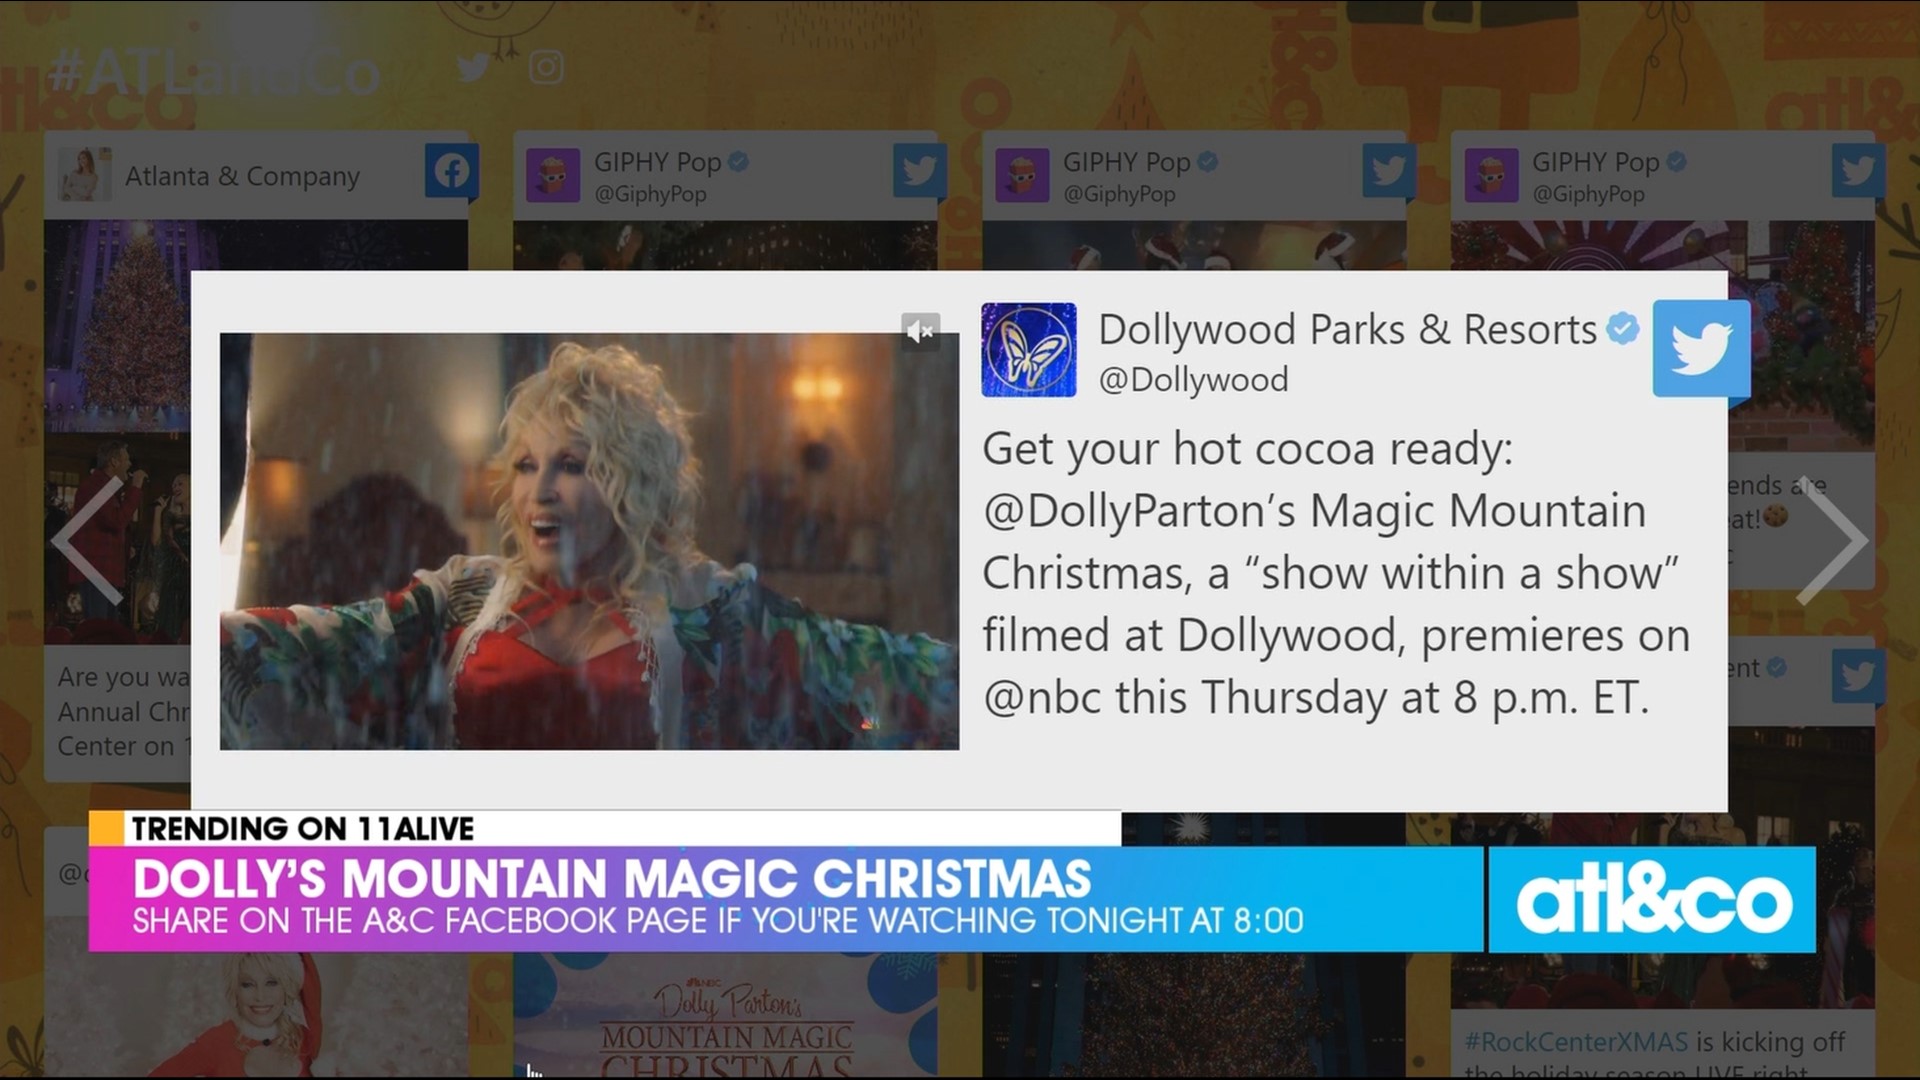 The spirit of a Mountain Magic Christmas! Don't miss Dolly Parton's star-studded holiday special tonight at 8:00 on 11Alive.